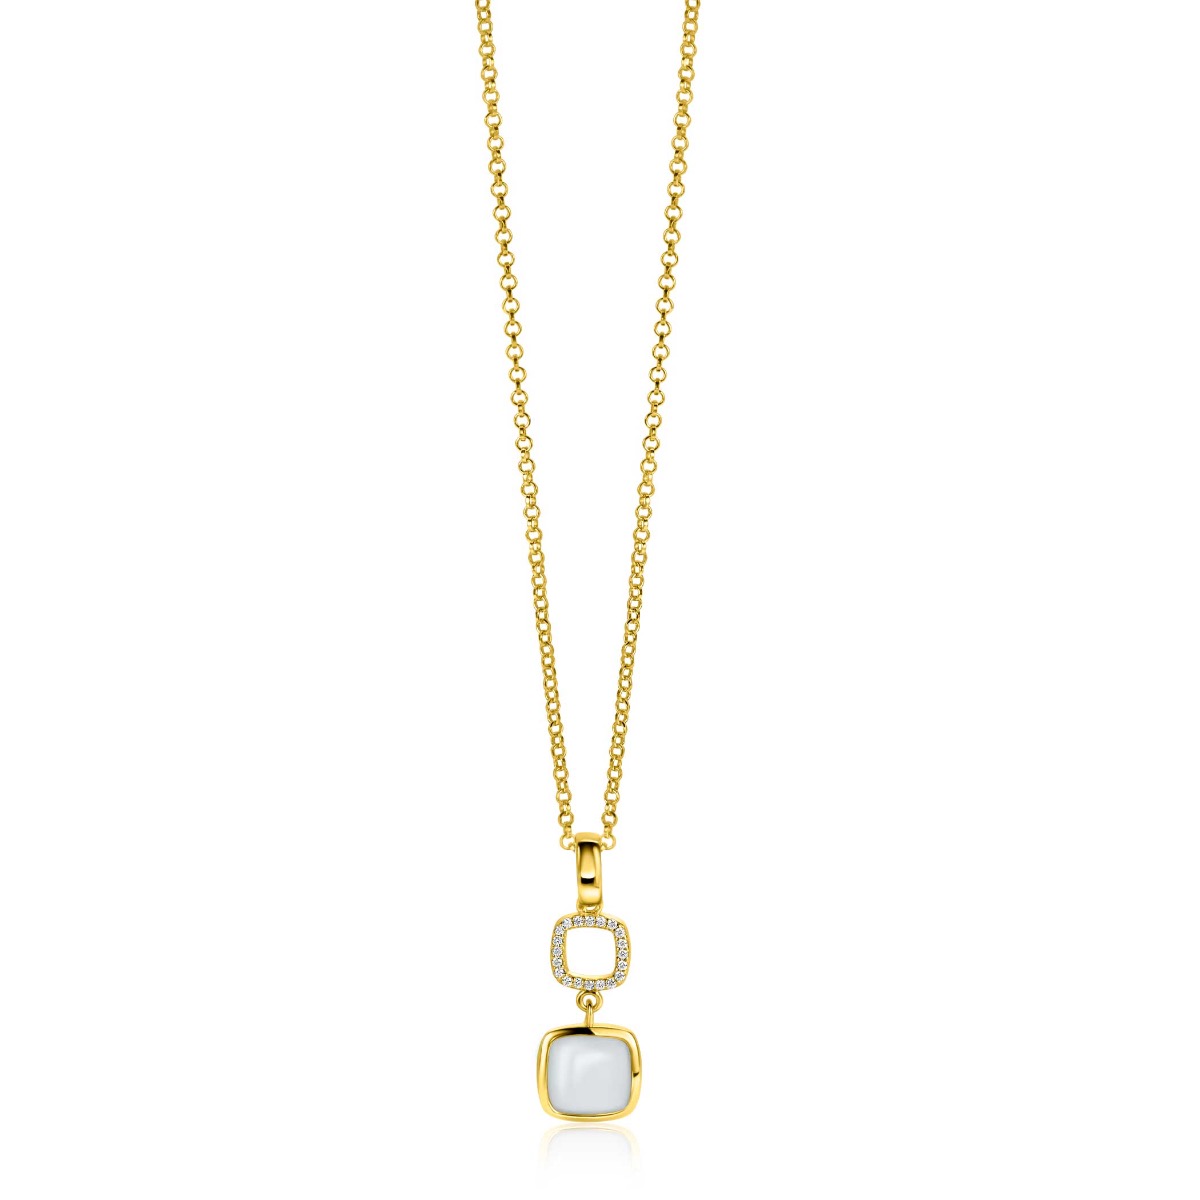 30mm ZINZI Gold Plated Sterling Silver Pendant Square Two-sided with White Onyx and Mint Green Color Stone ZIH2308 (excl. necklace)